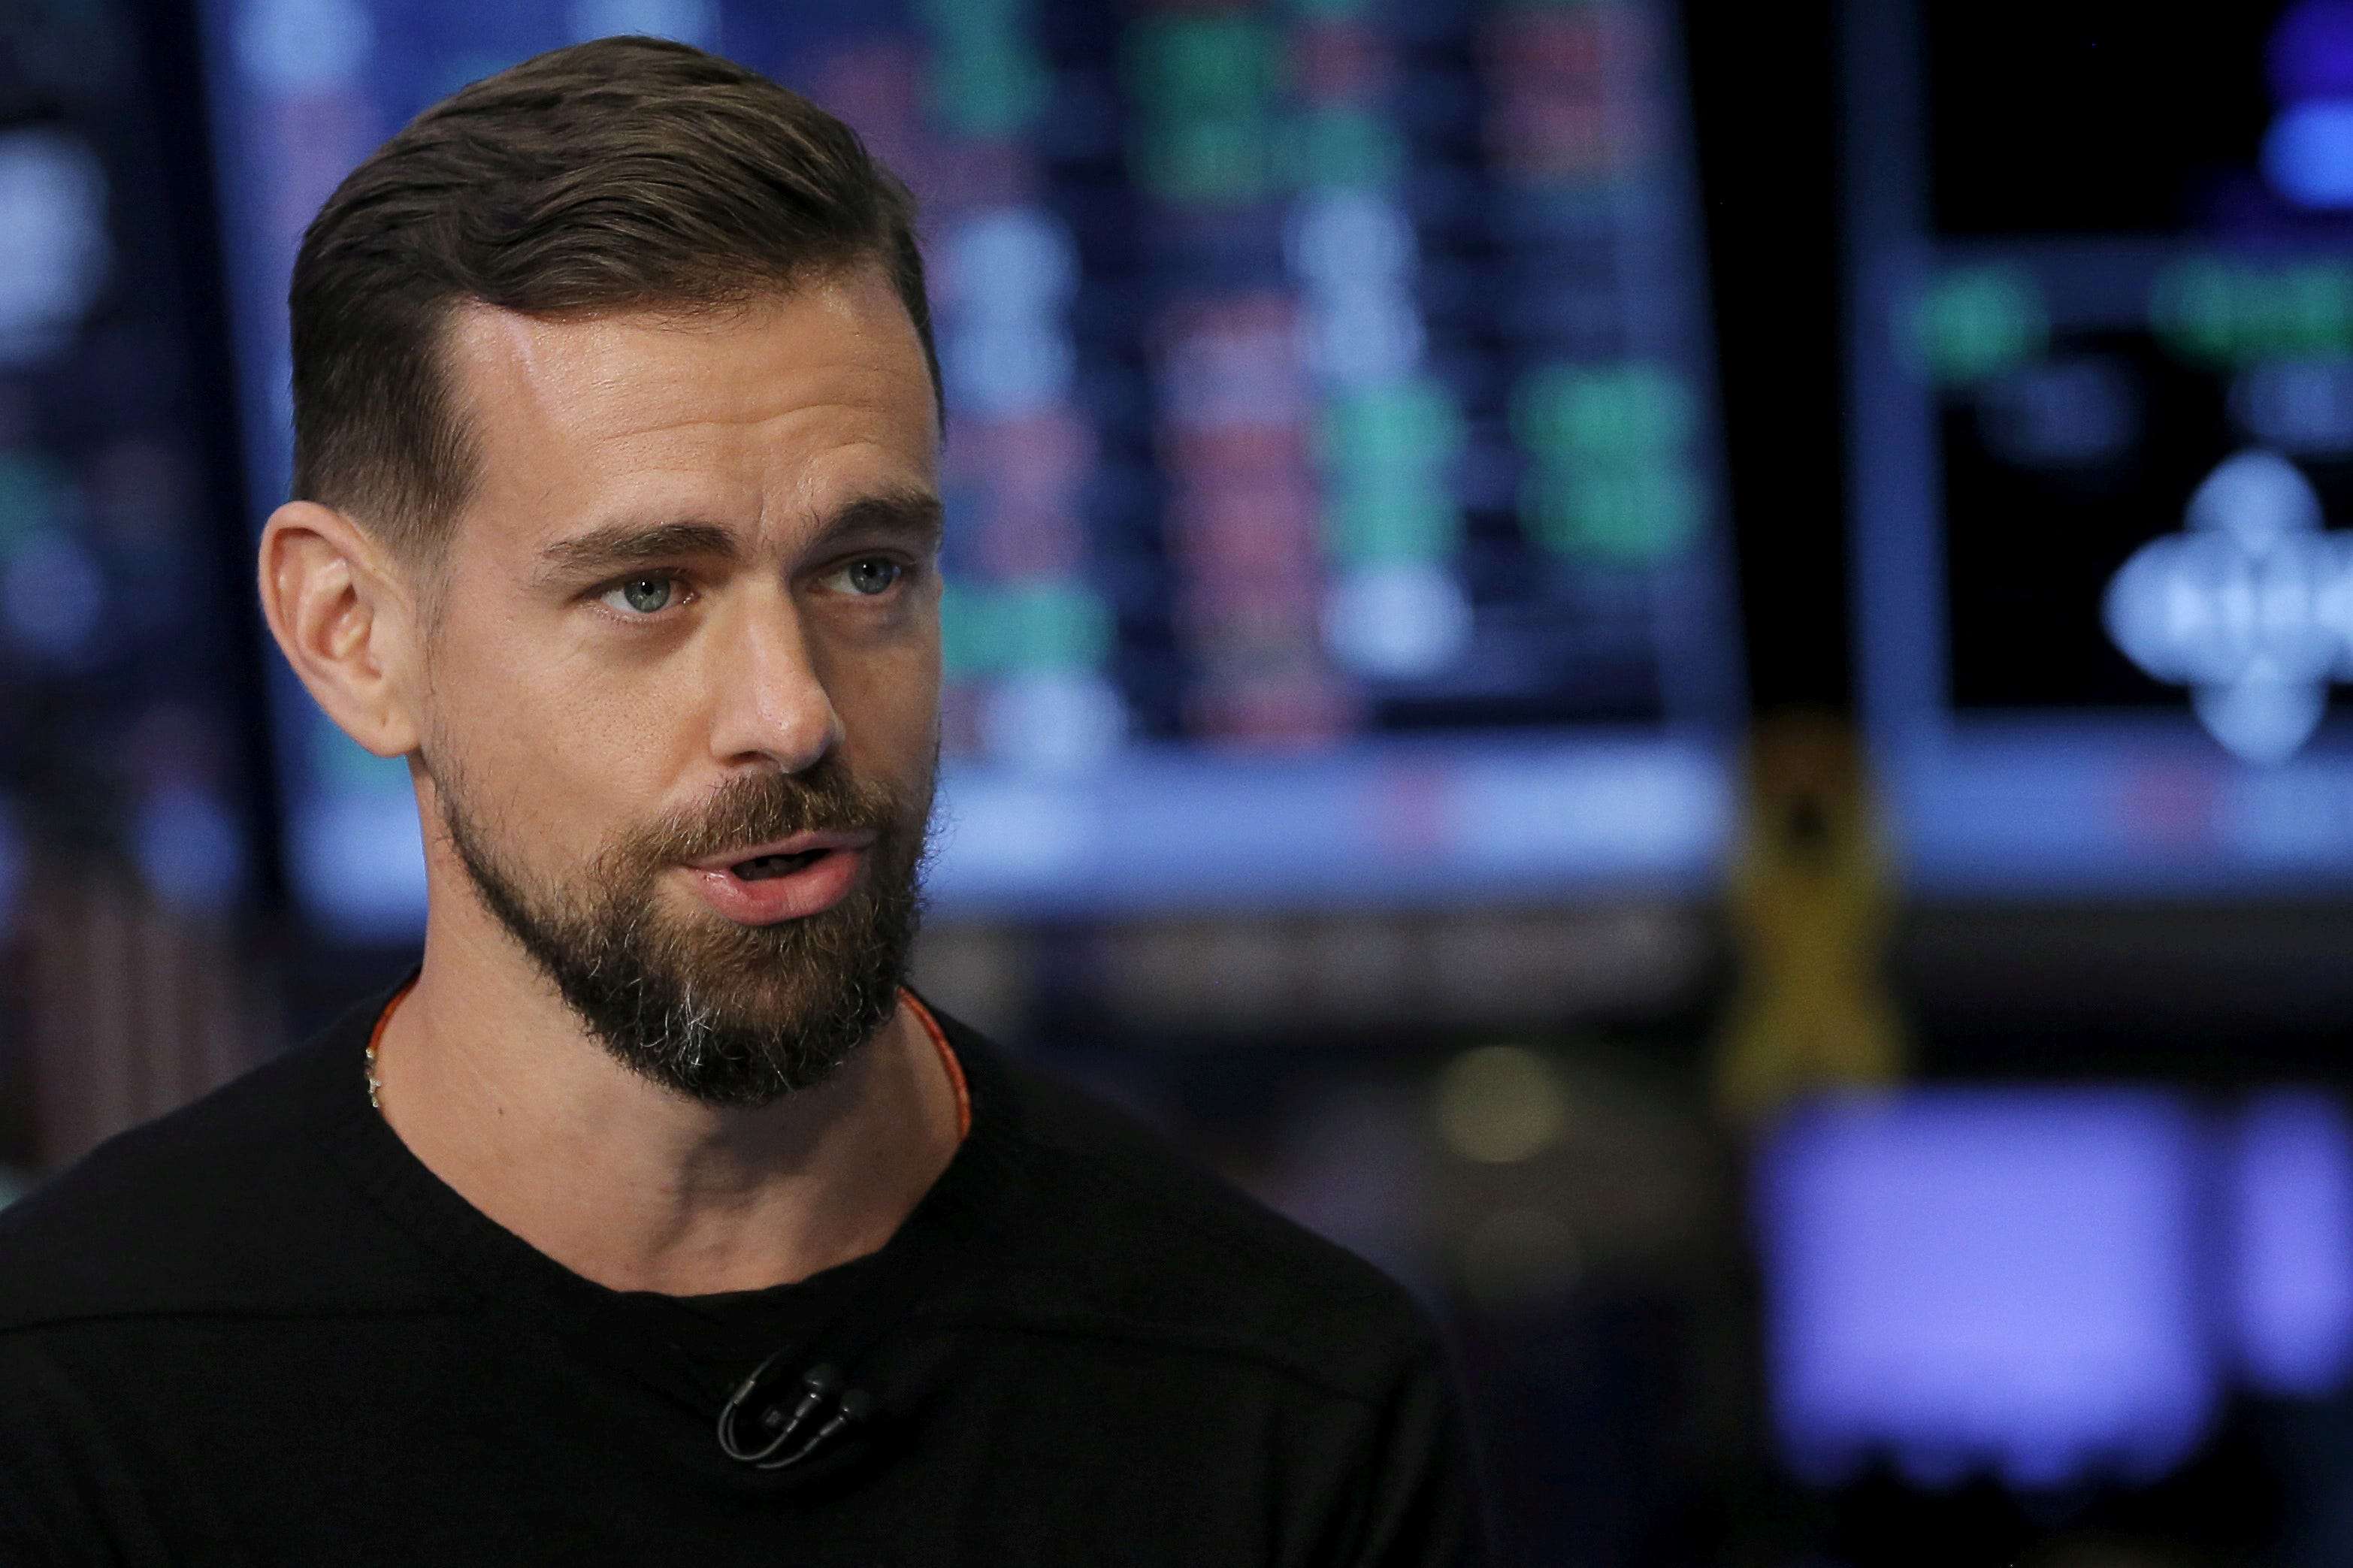 Twitter CEO Jack Dorsey's first tweet sold for 2.9 million on Sunday